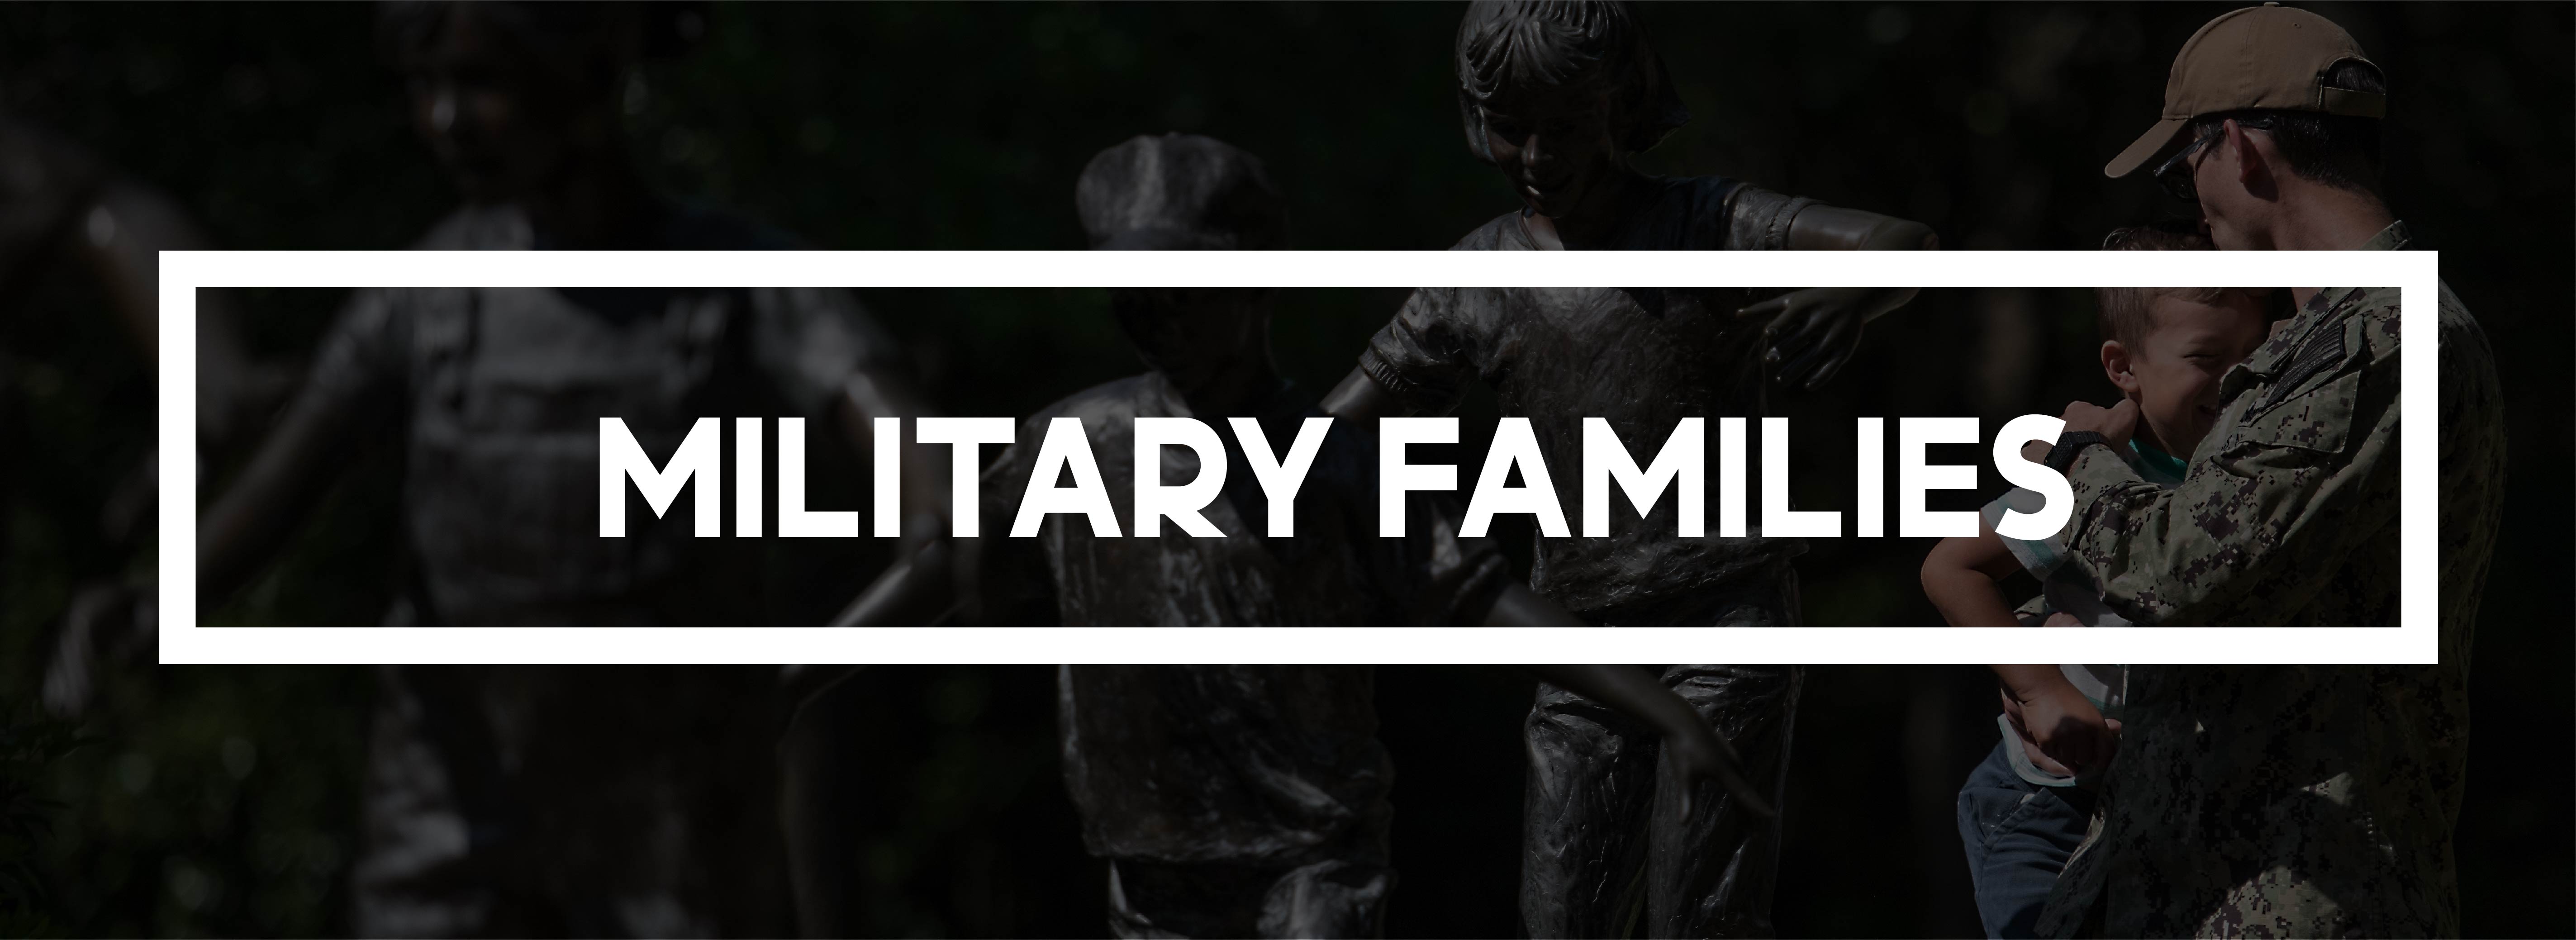 A logo for Military Families 